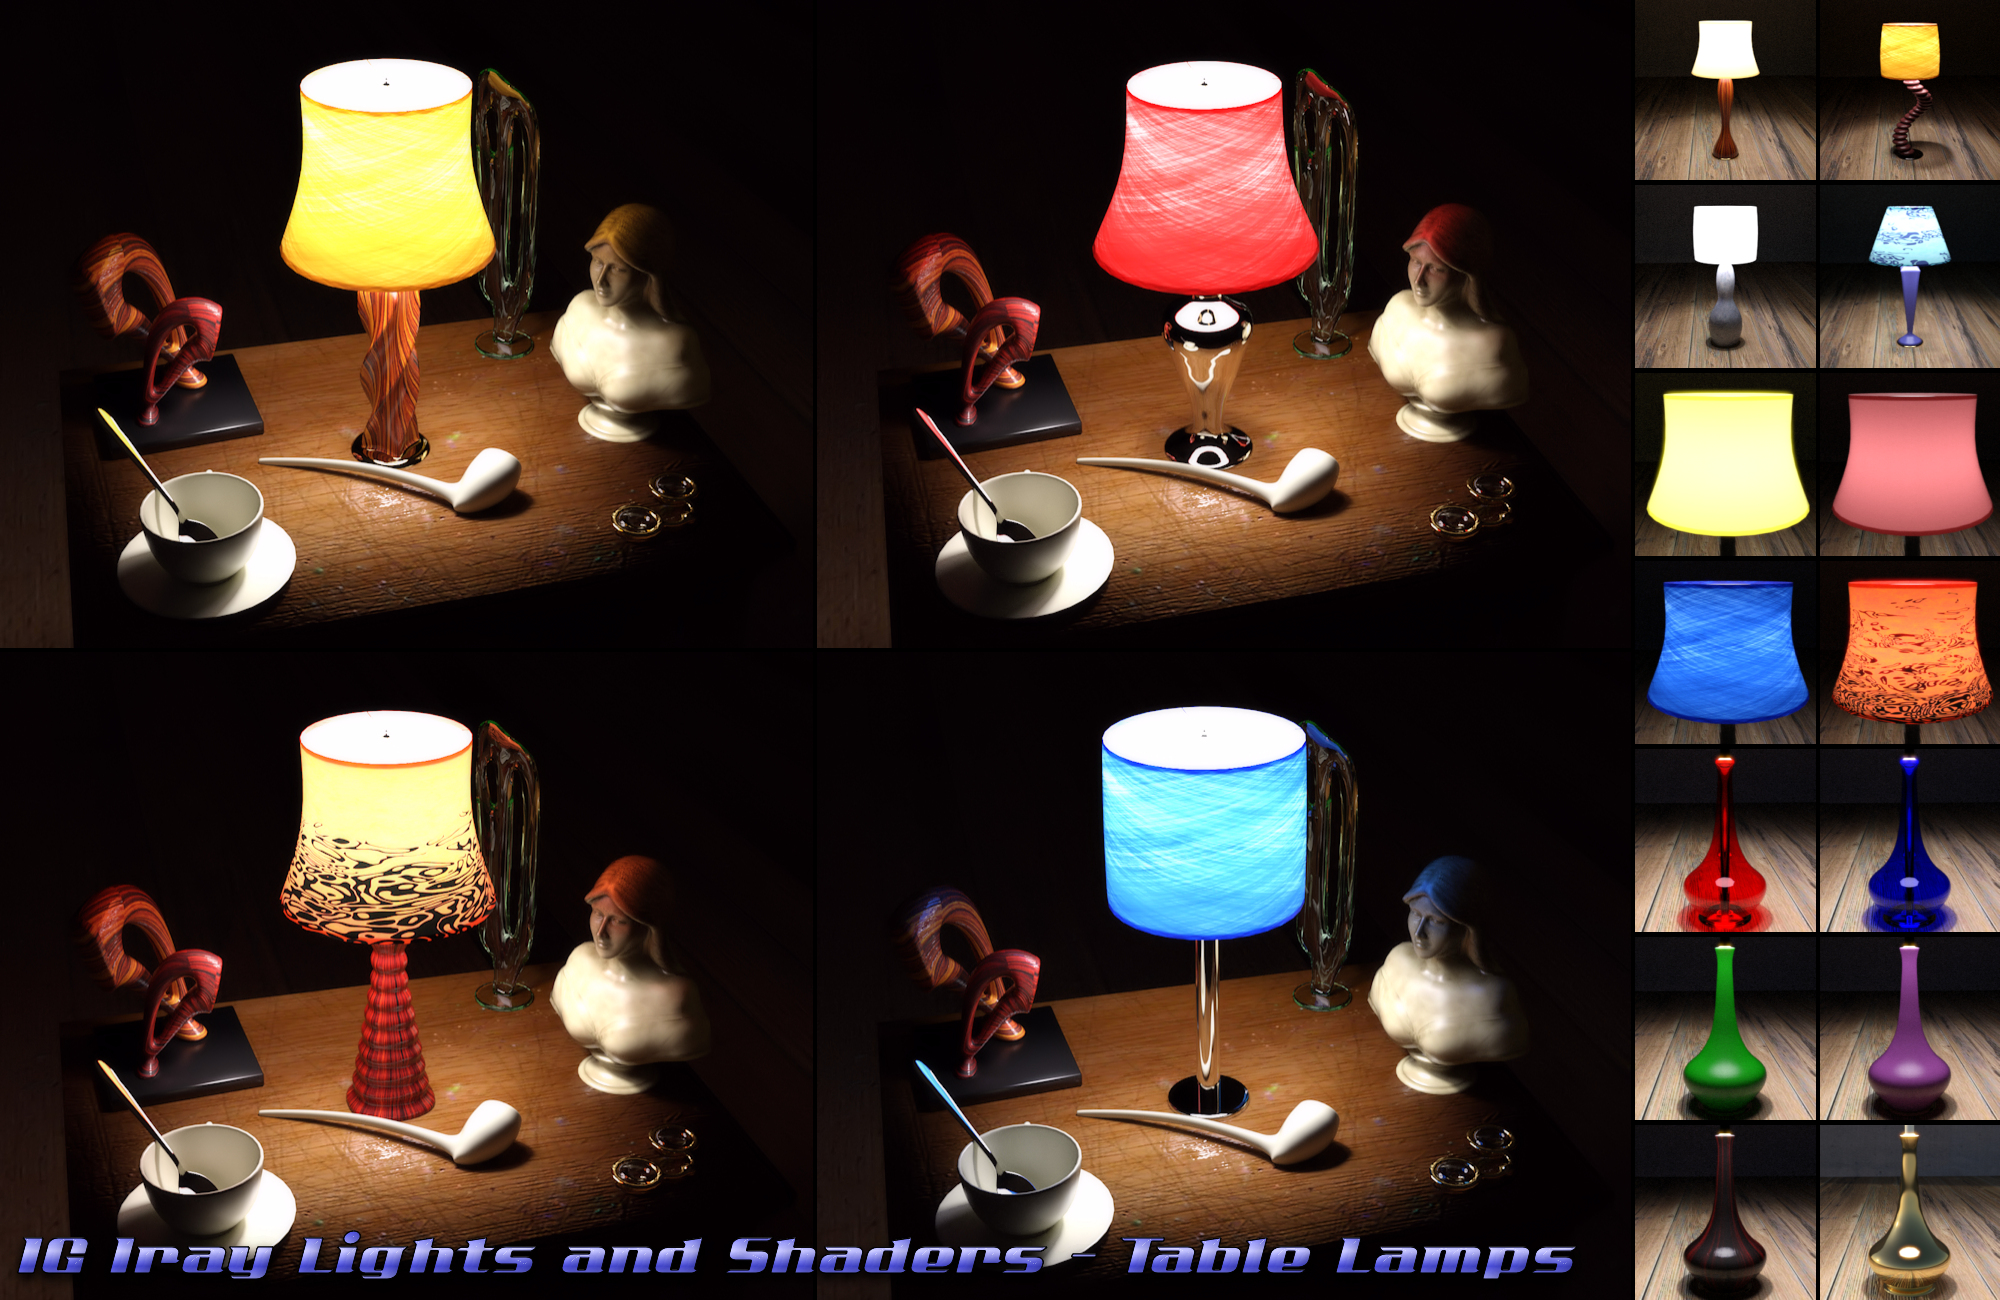 IG Iray Lights and Shaders - Table Lamps by: IDG DesignsInaneGlory, 3D Models by Daz 3D